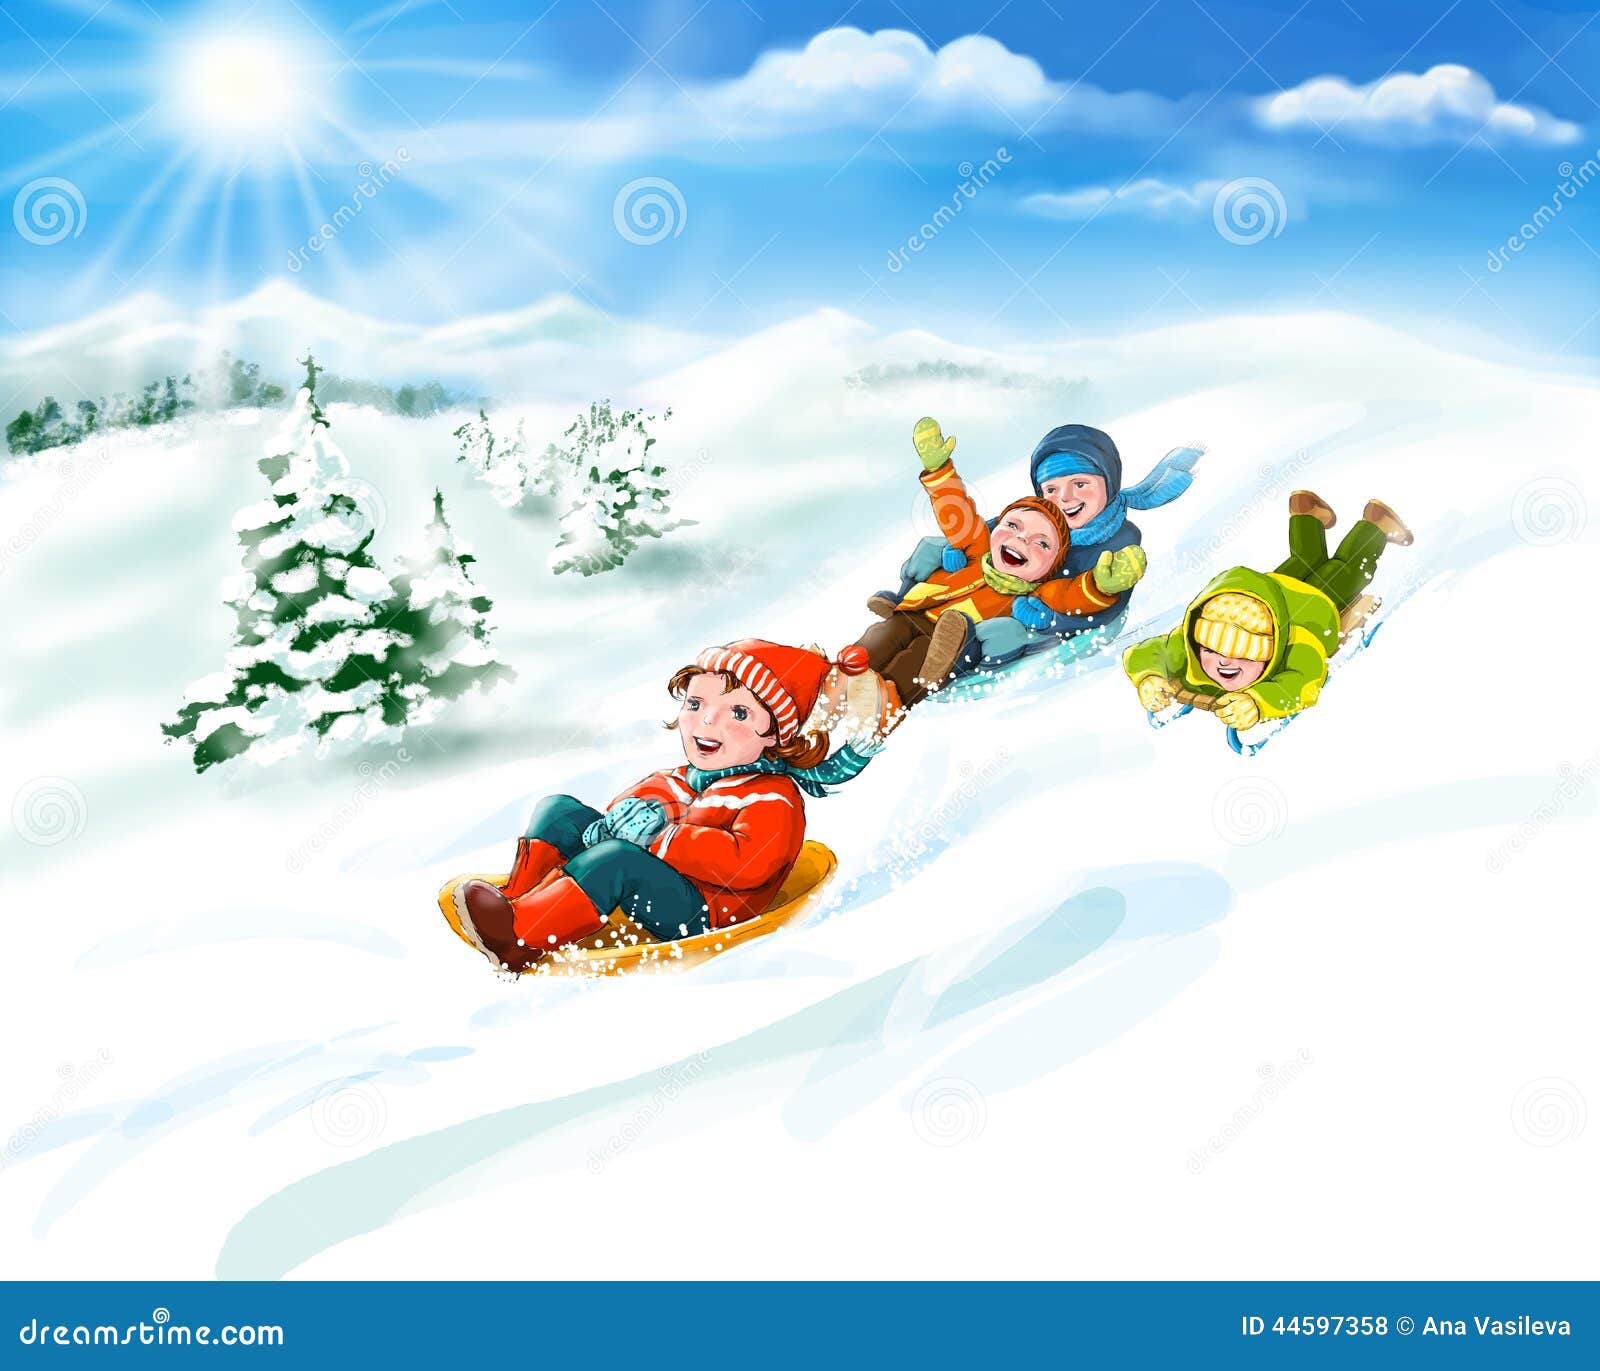 winter vacation clipart - photo #11